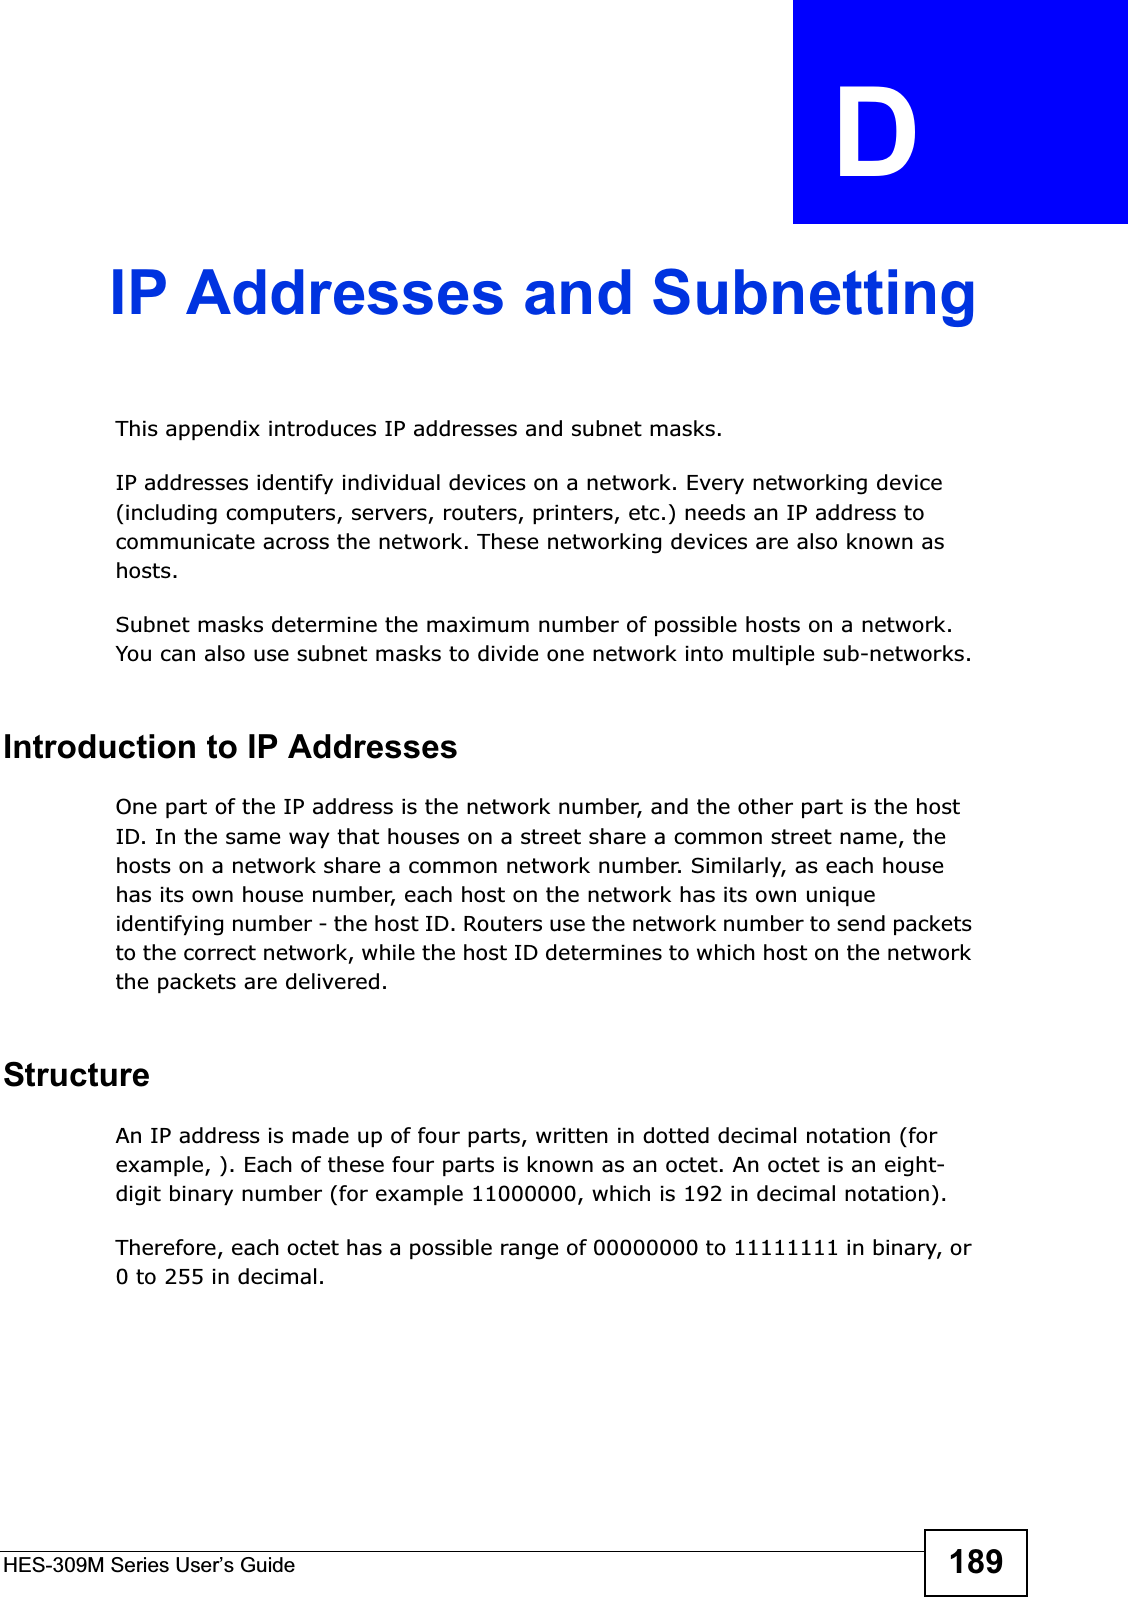 HES-309M Series User’s Guide 189APPENDIX  D IP Addresses and SubnettingThis appendix introduces IP addresses and subnet masks. IP addresses identify individual devices on a network. Every networking device (including computers, servers, routers, printers, etc.) needs an IP address to communicate across the network. These networking devices are also known as hosts.Subnet masks determine the maximum number of possible hosts on a network. You can also use subnet masks to divide one network into multiple sub-networks.Introduction to IP AddressesOne part of the IP address is the network number, and the other part is the host ID. In the same way that houses on a street share a common street name, the hosts on a network share a common network number. Similarly, as each house has its own house number, each host on the network has its own unique identifying number - the host ID. Routers use the network number to send packets to the correct network, while the host ID determines to which host on the network the packets are delivered.StructureAn IP address is made up of four parts, written in dotted decimal notation (for example, ). Each of these four parts is known as an octet. An octet is an eight-digit binary number (for example 11000000, which is 192 in decimal notation). Therefore, each octet has a possible range of 00000000 to 11111111 in binary, or 0 to 255 in decimal.